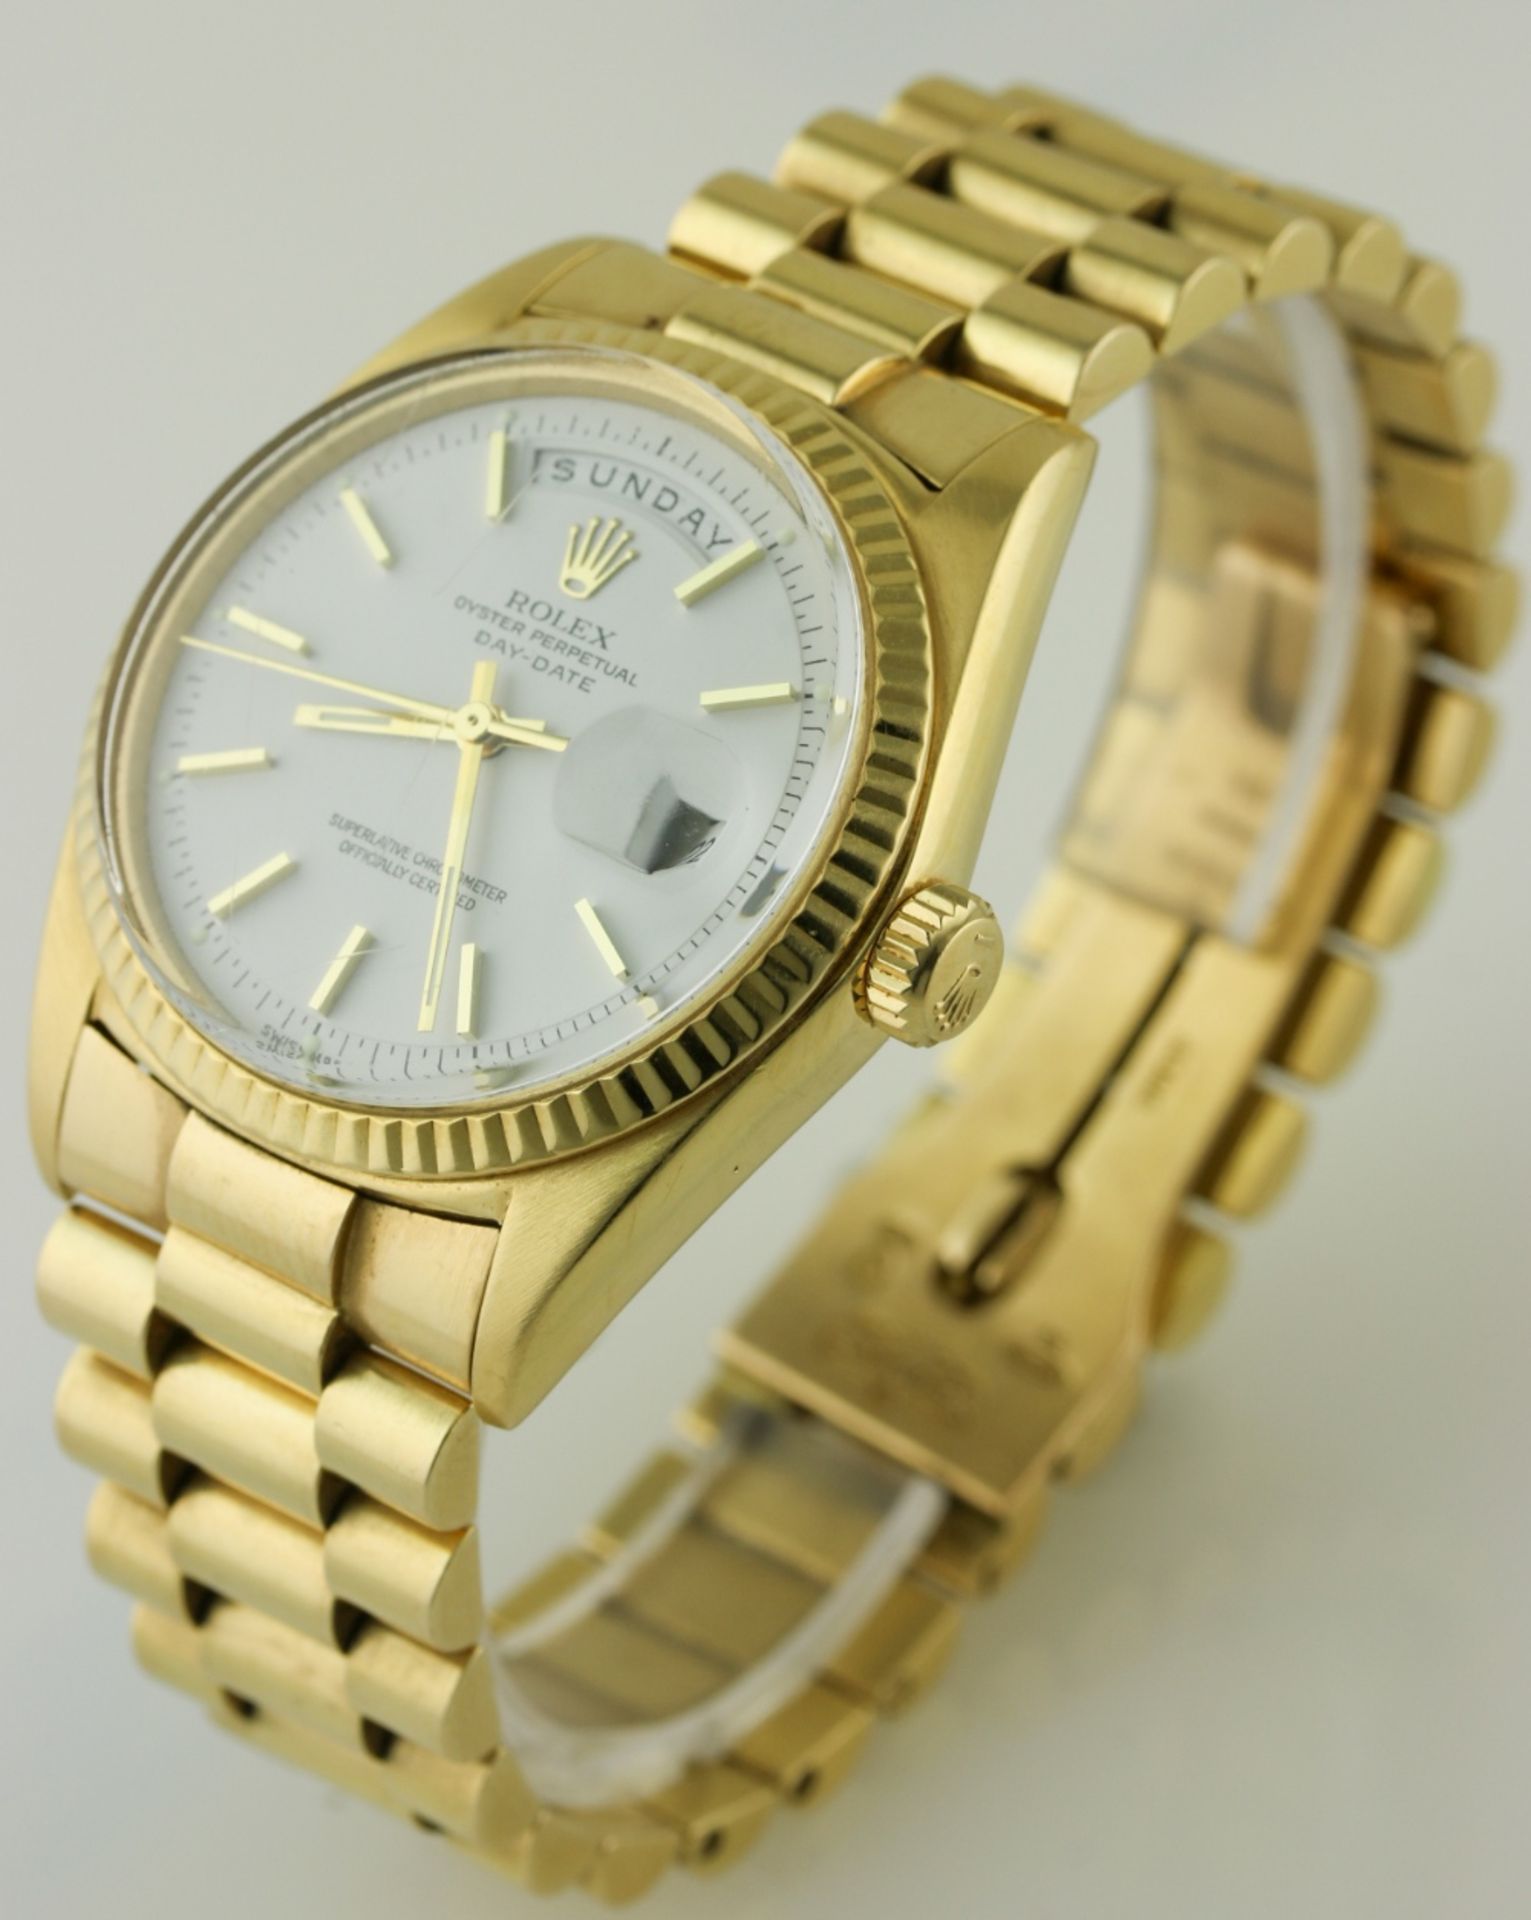 A GENTLEMAN'S 18K SOLID GOLD ROLEX OYSTER PERPETUAL DAY DATE BRACELET WATCH CIRCA 1969, REF. 1803
D: - Image 4 of 8